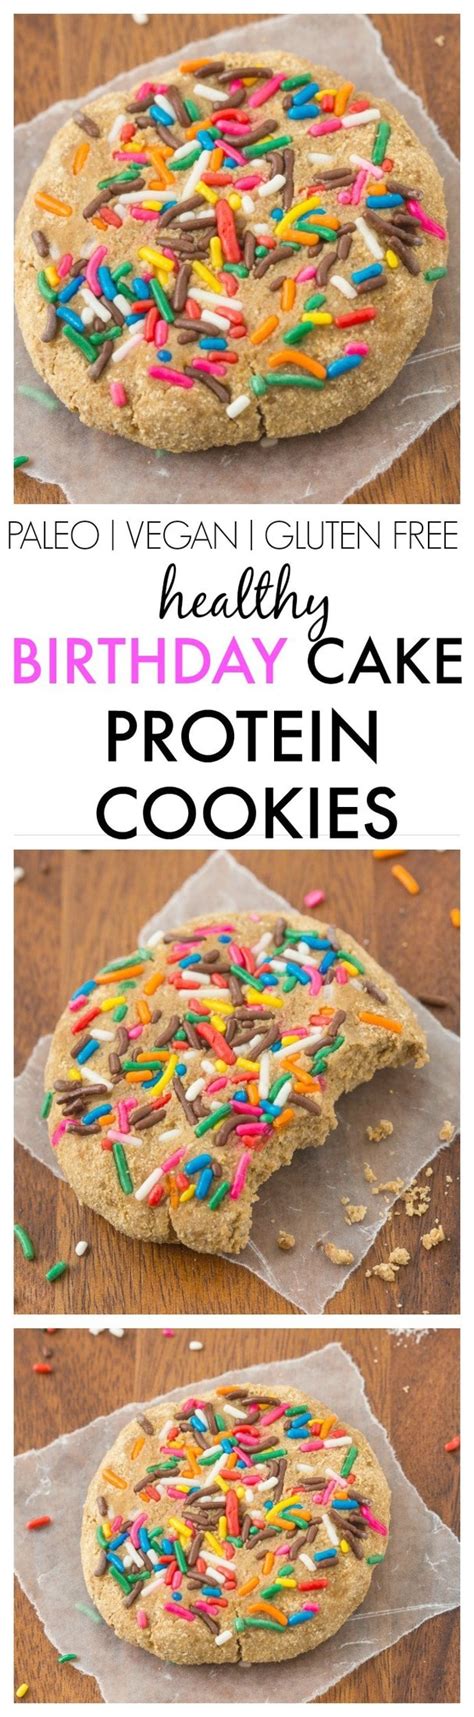 Birthdays are all about being treated and celebrating your little one's special day—in moderation, of course! Healthy Birthday Cake Protein Cookies